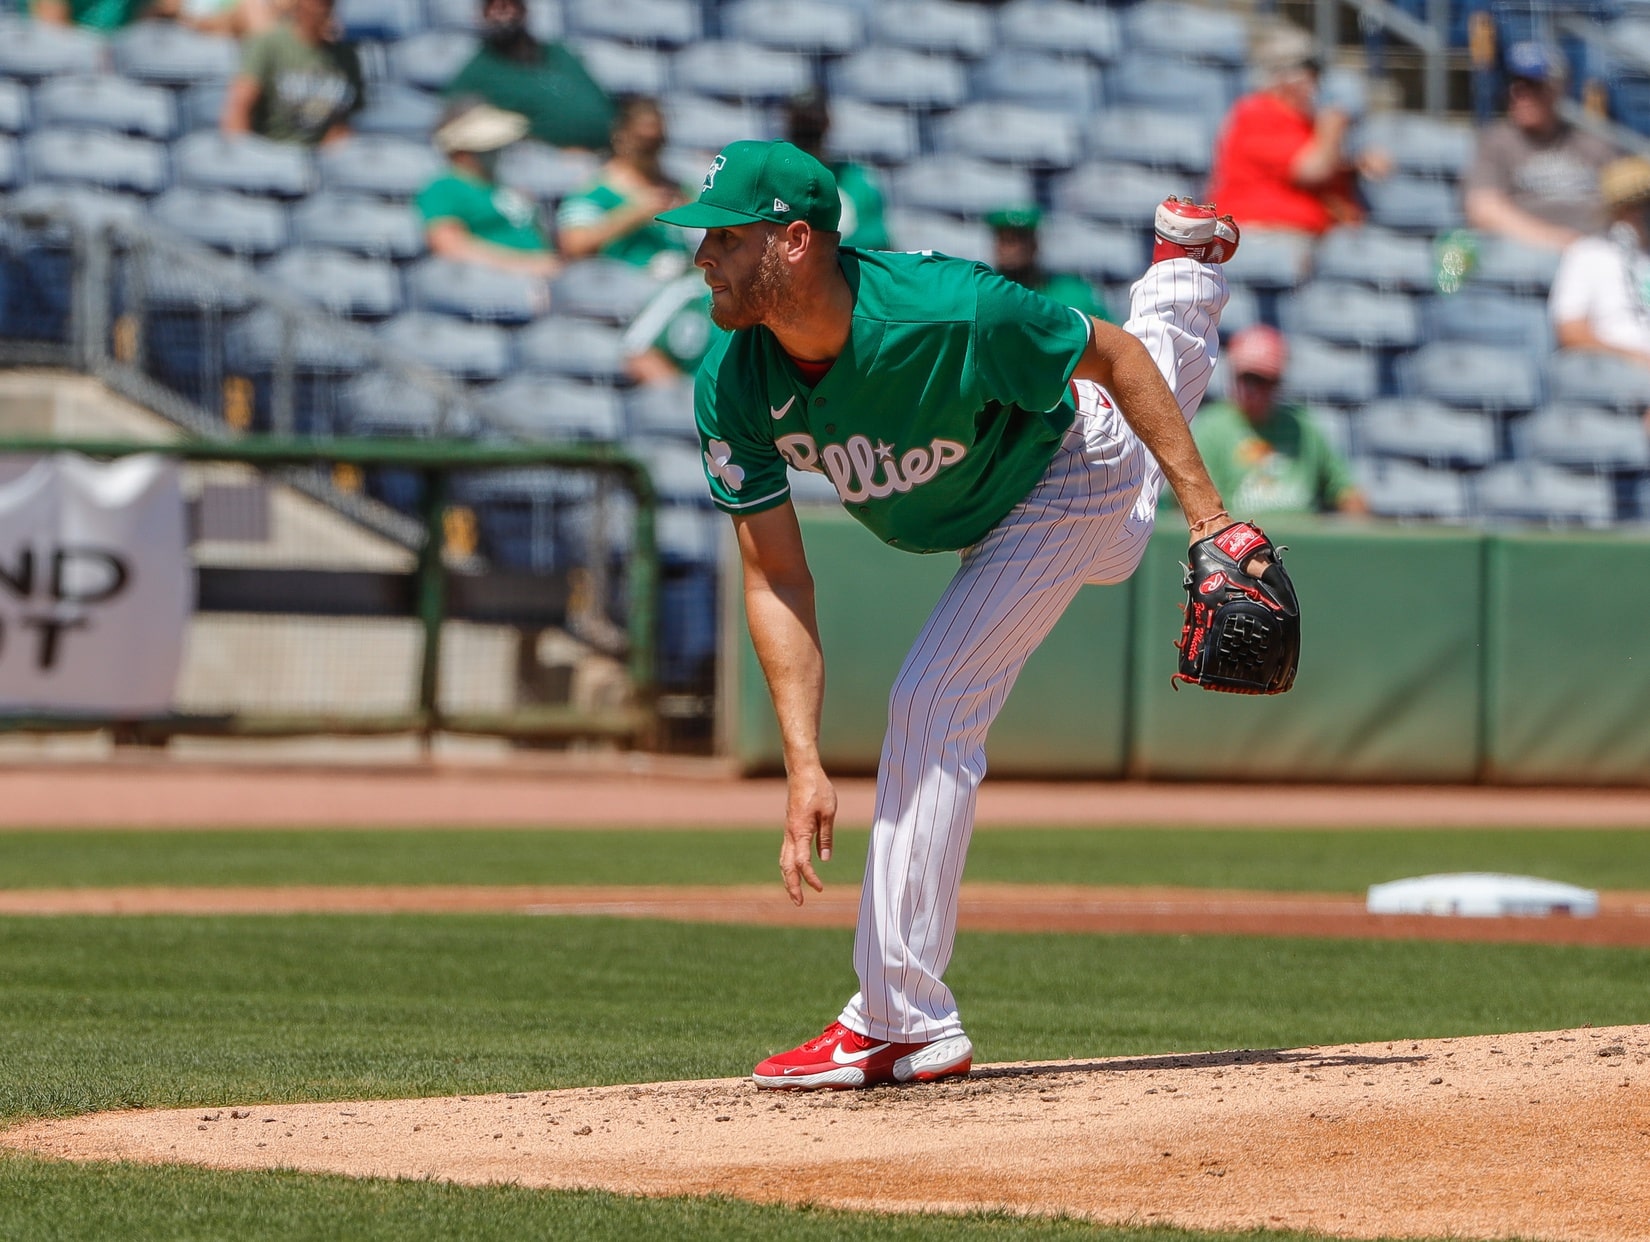 Phillies Won't Wear Green Uniforms on St. Patrick's Day - Crossing Broad